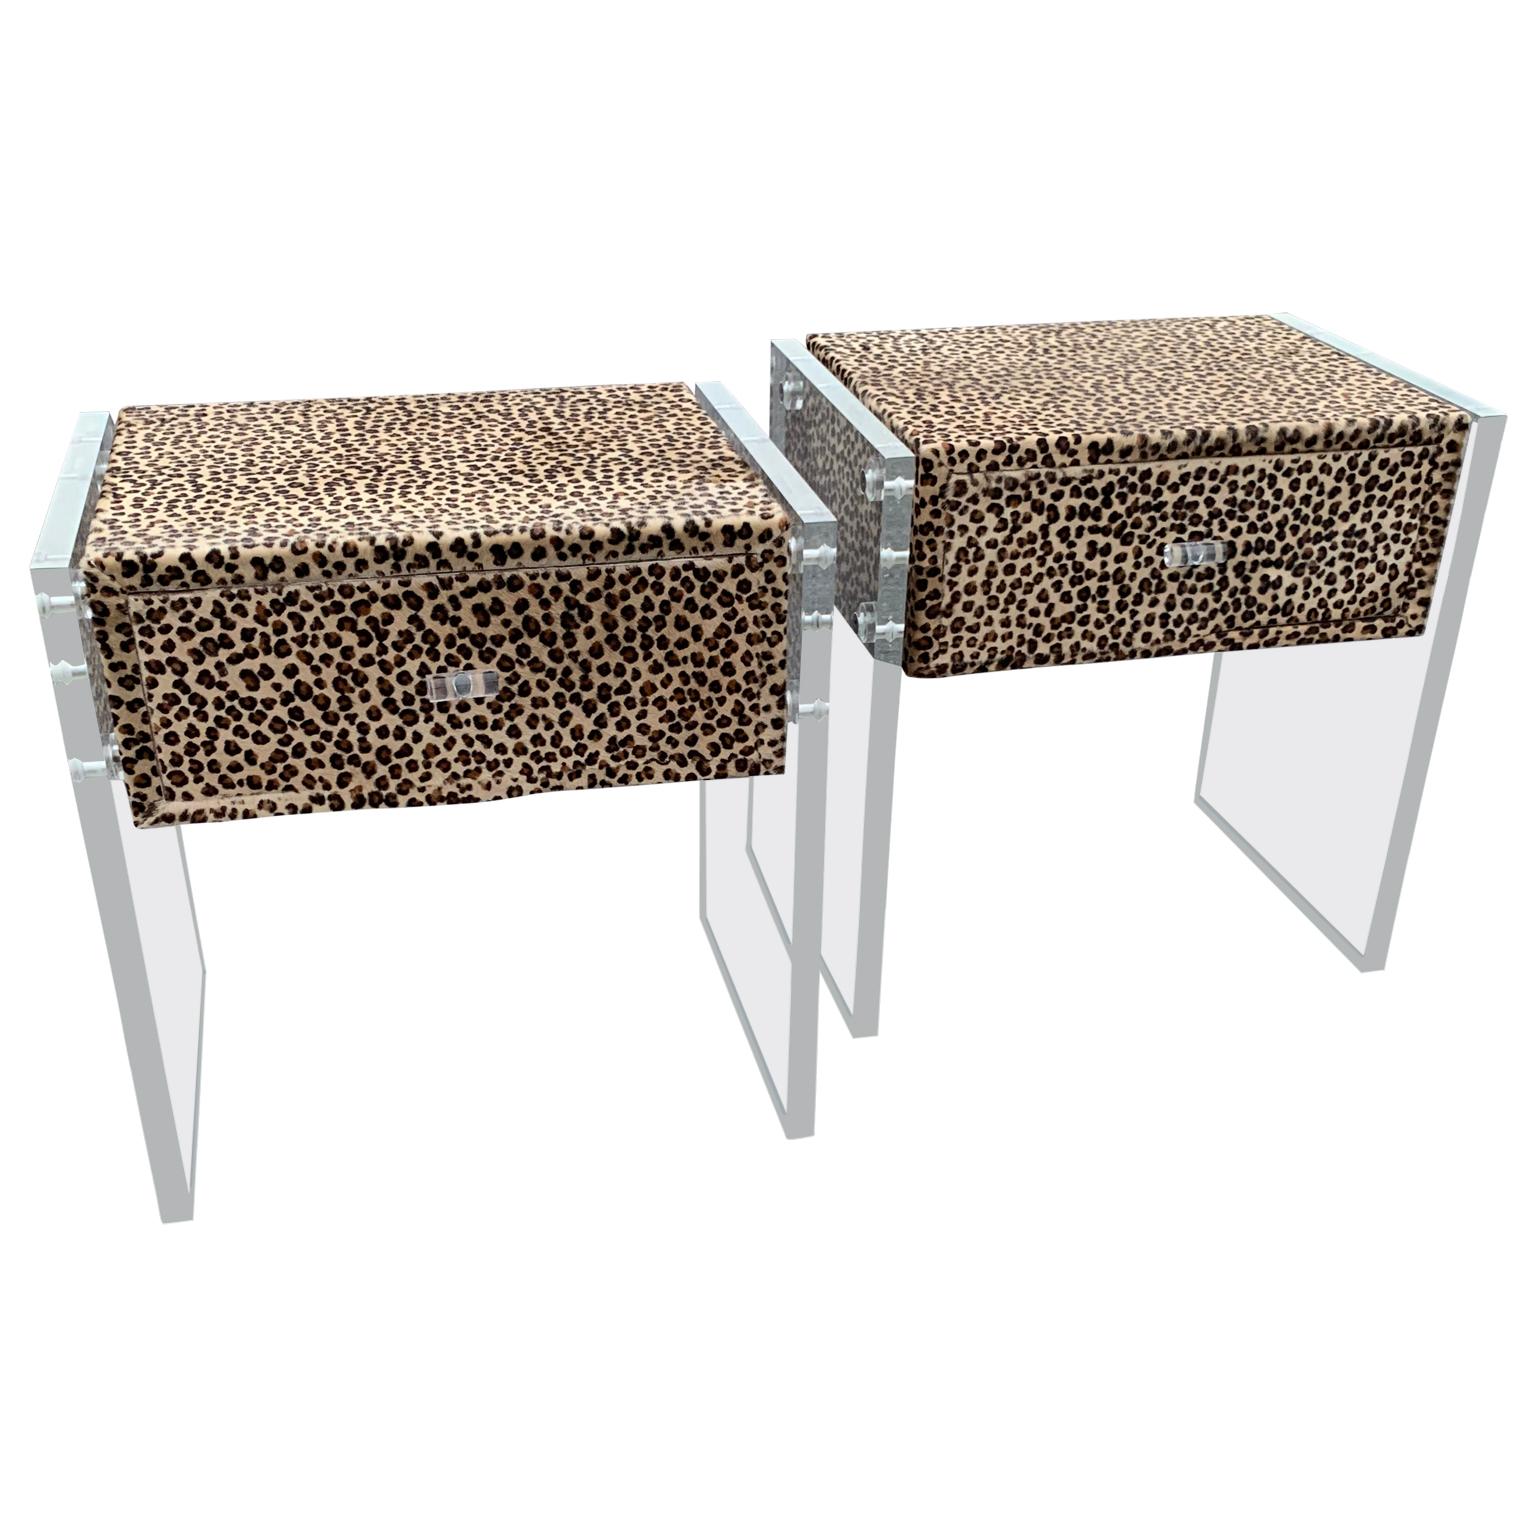 Pair of Faux Cheetah Skin Upholstered Nightstands with Lucite Side Panels